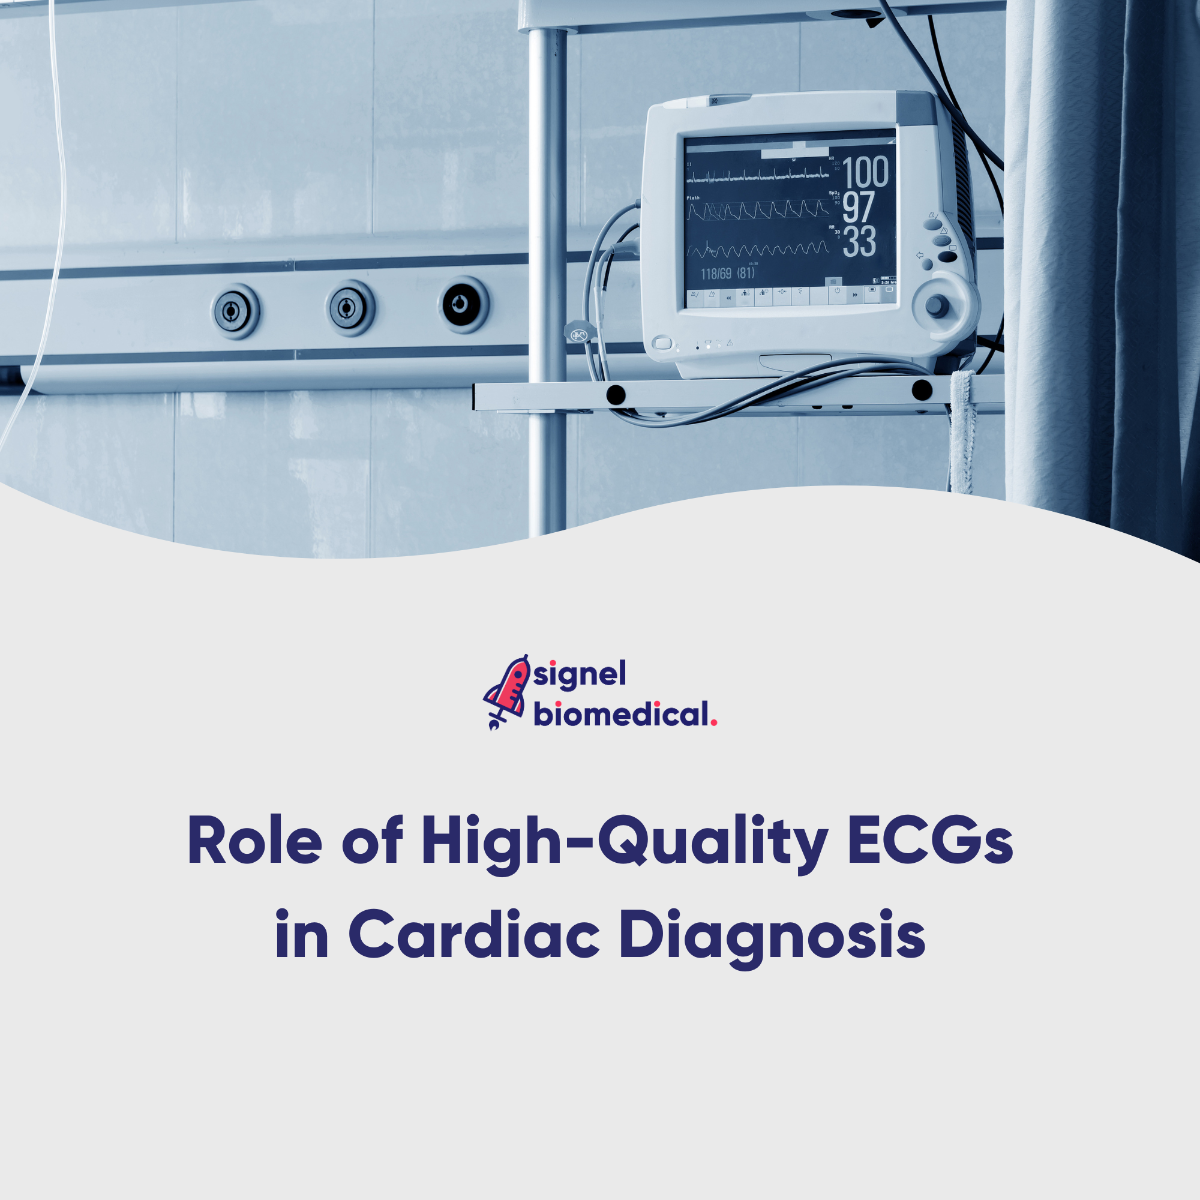 Role of High-Quality ECGs in Cardiac Diagnosis